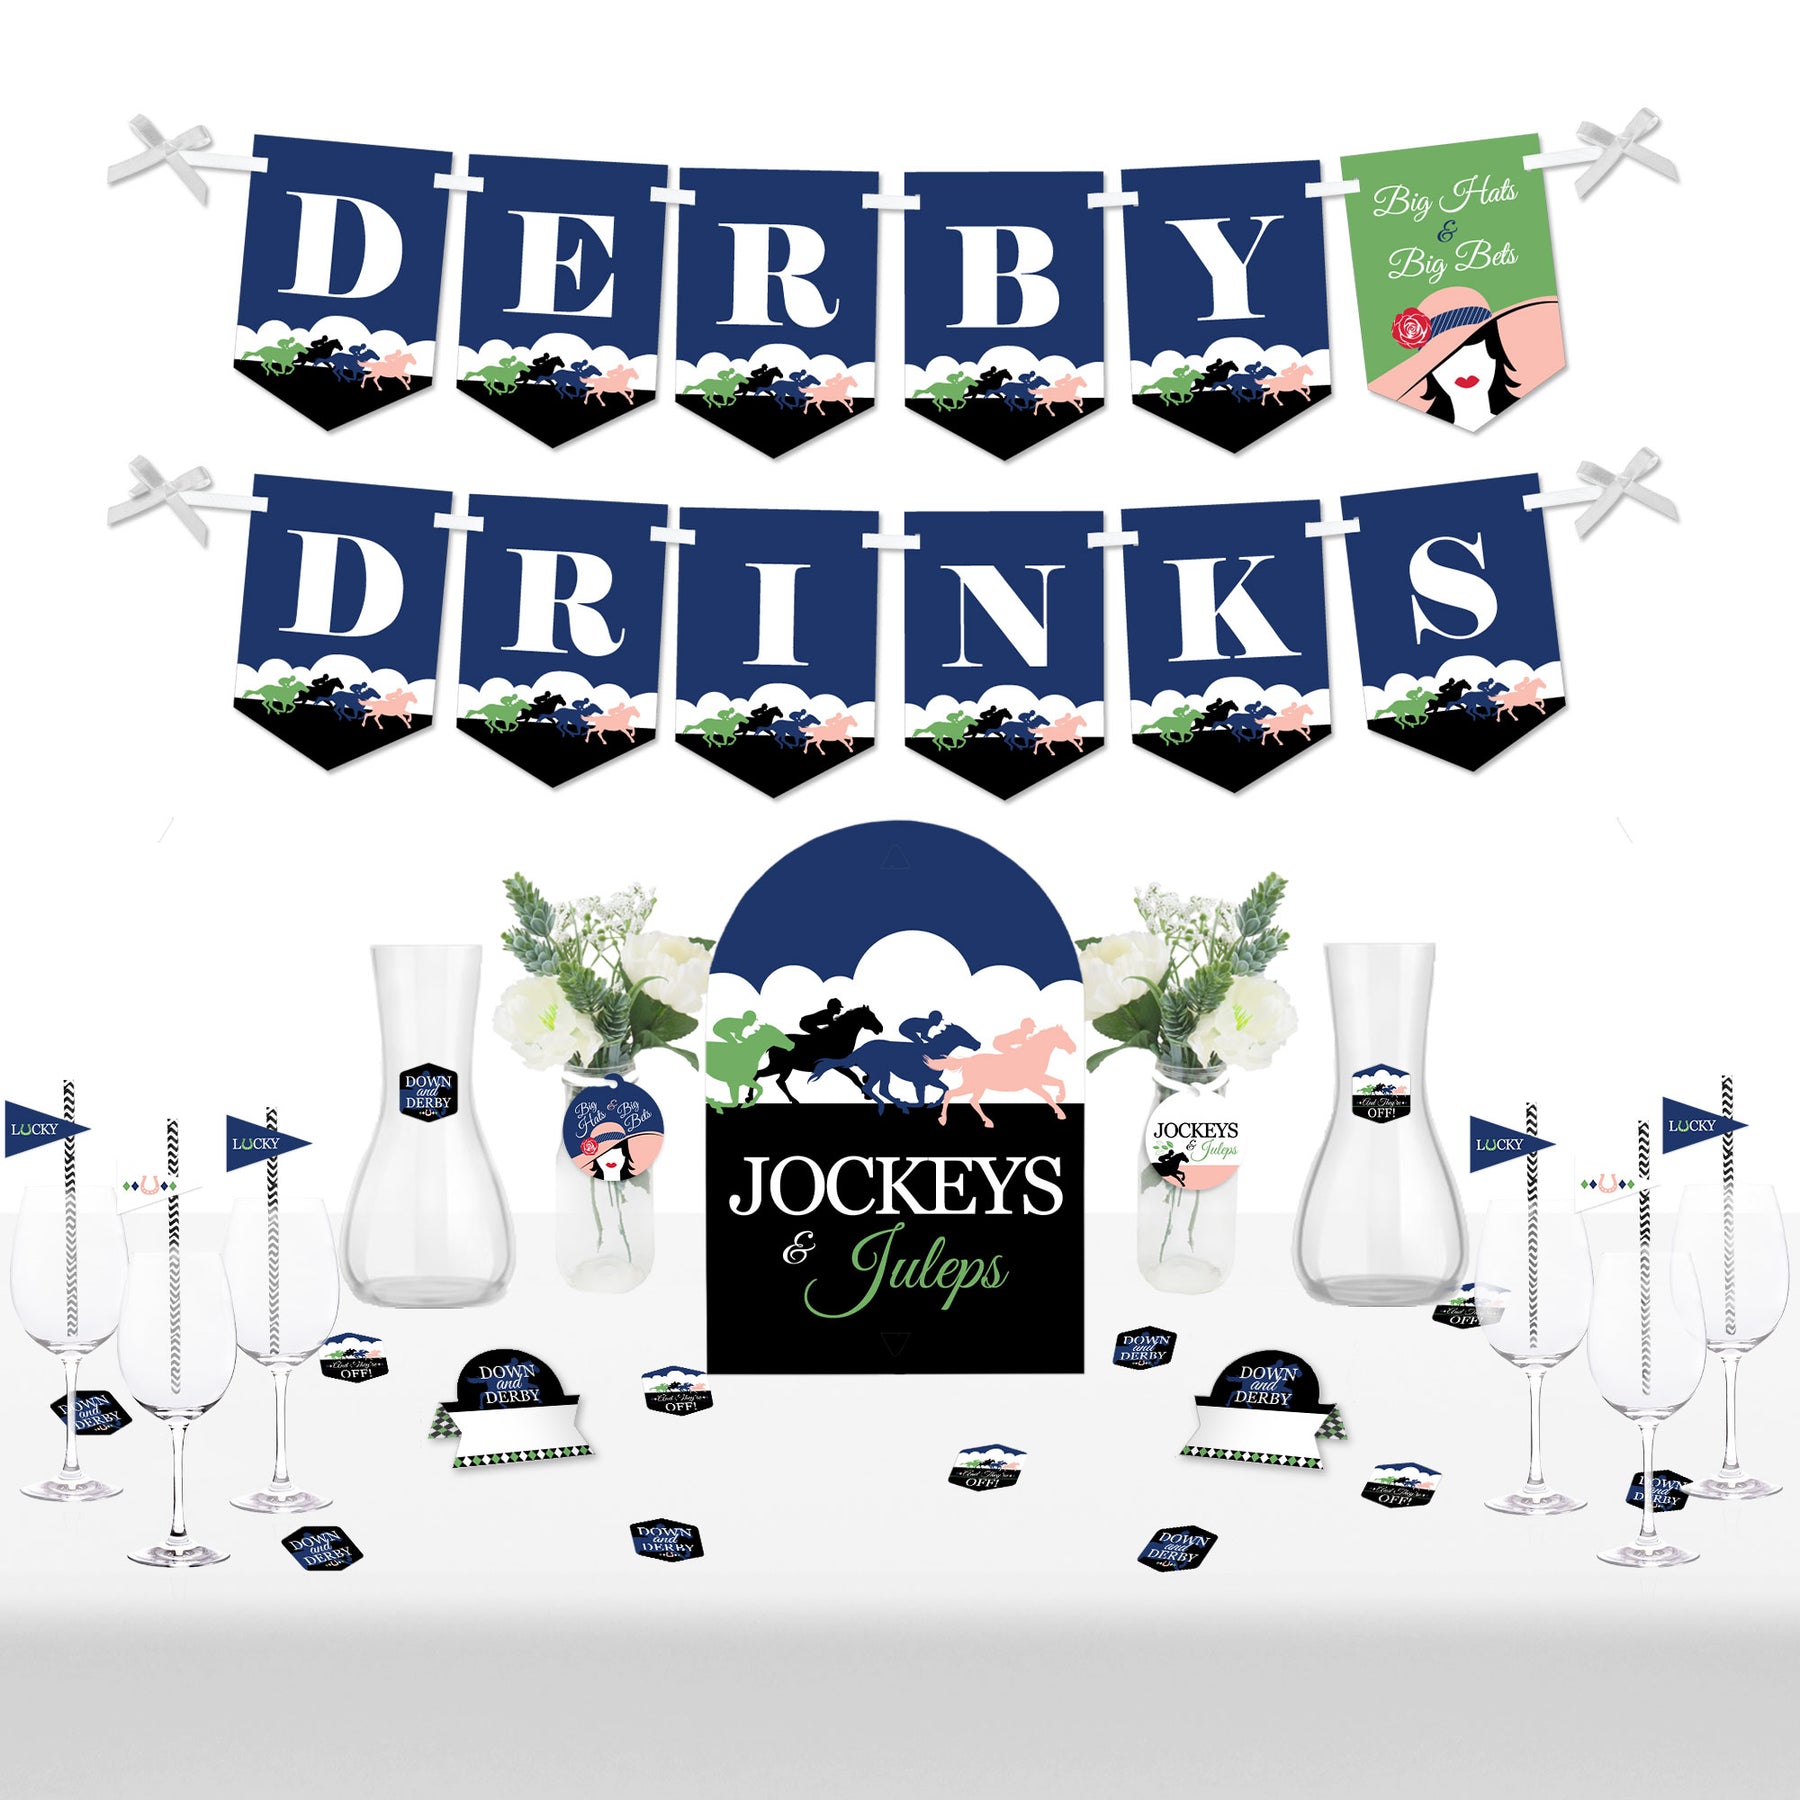  Kentucky Derby Party Supplies, Horse Racing Hanging